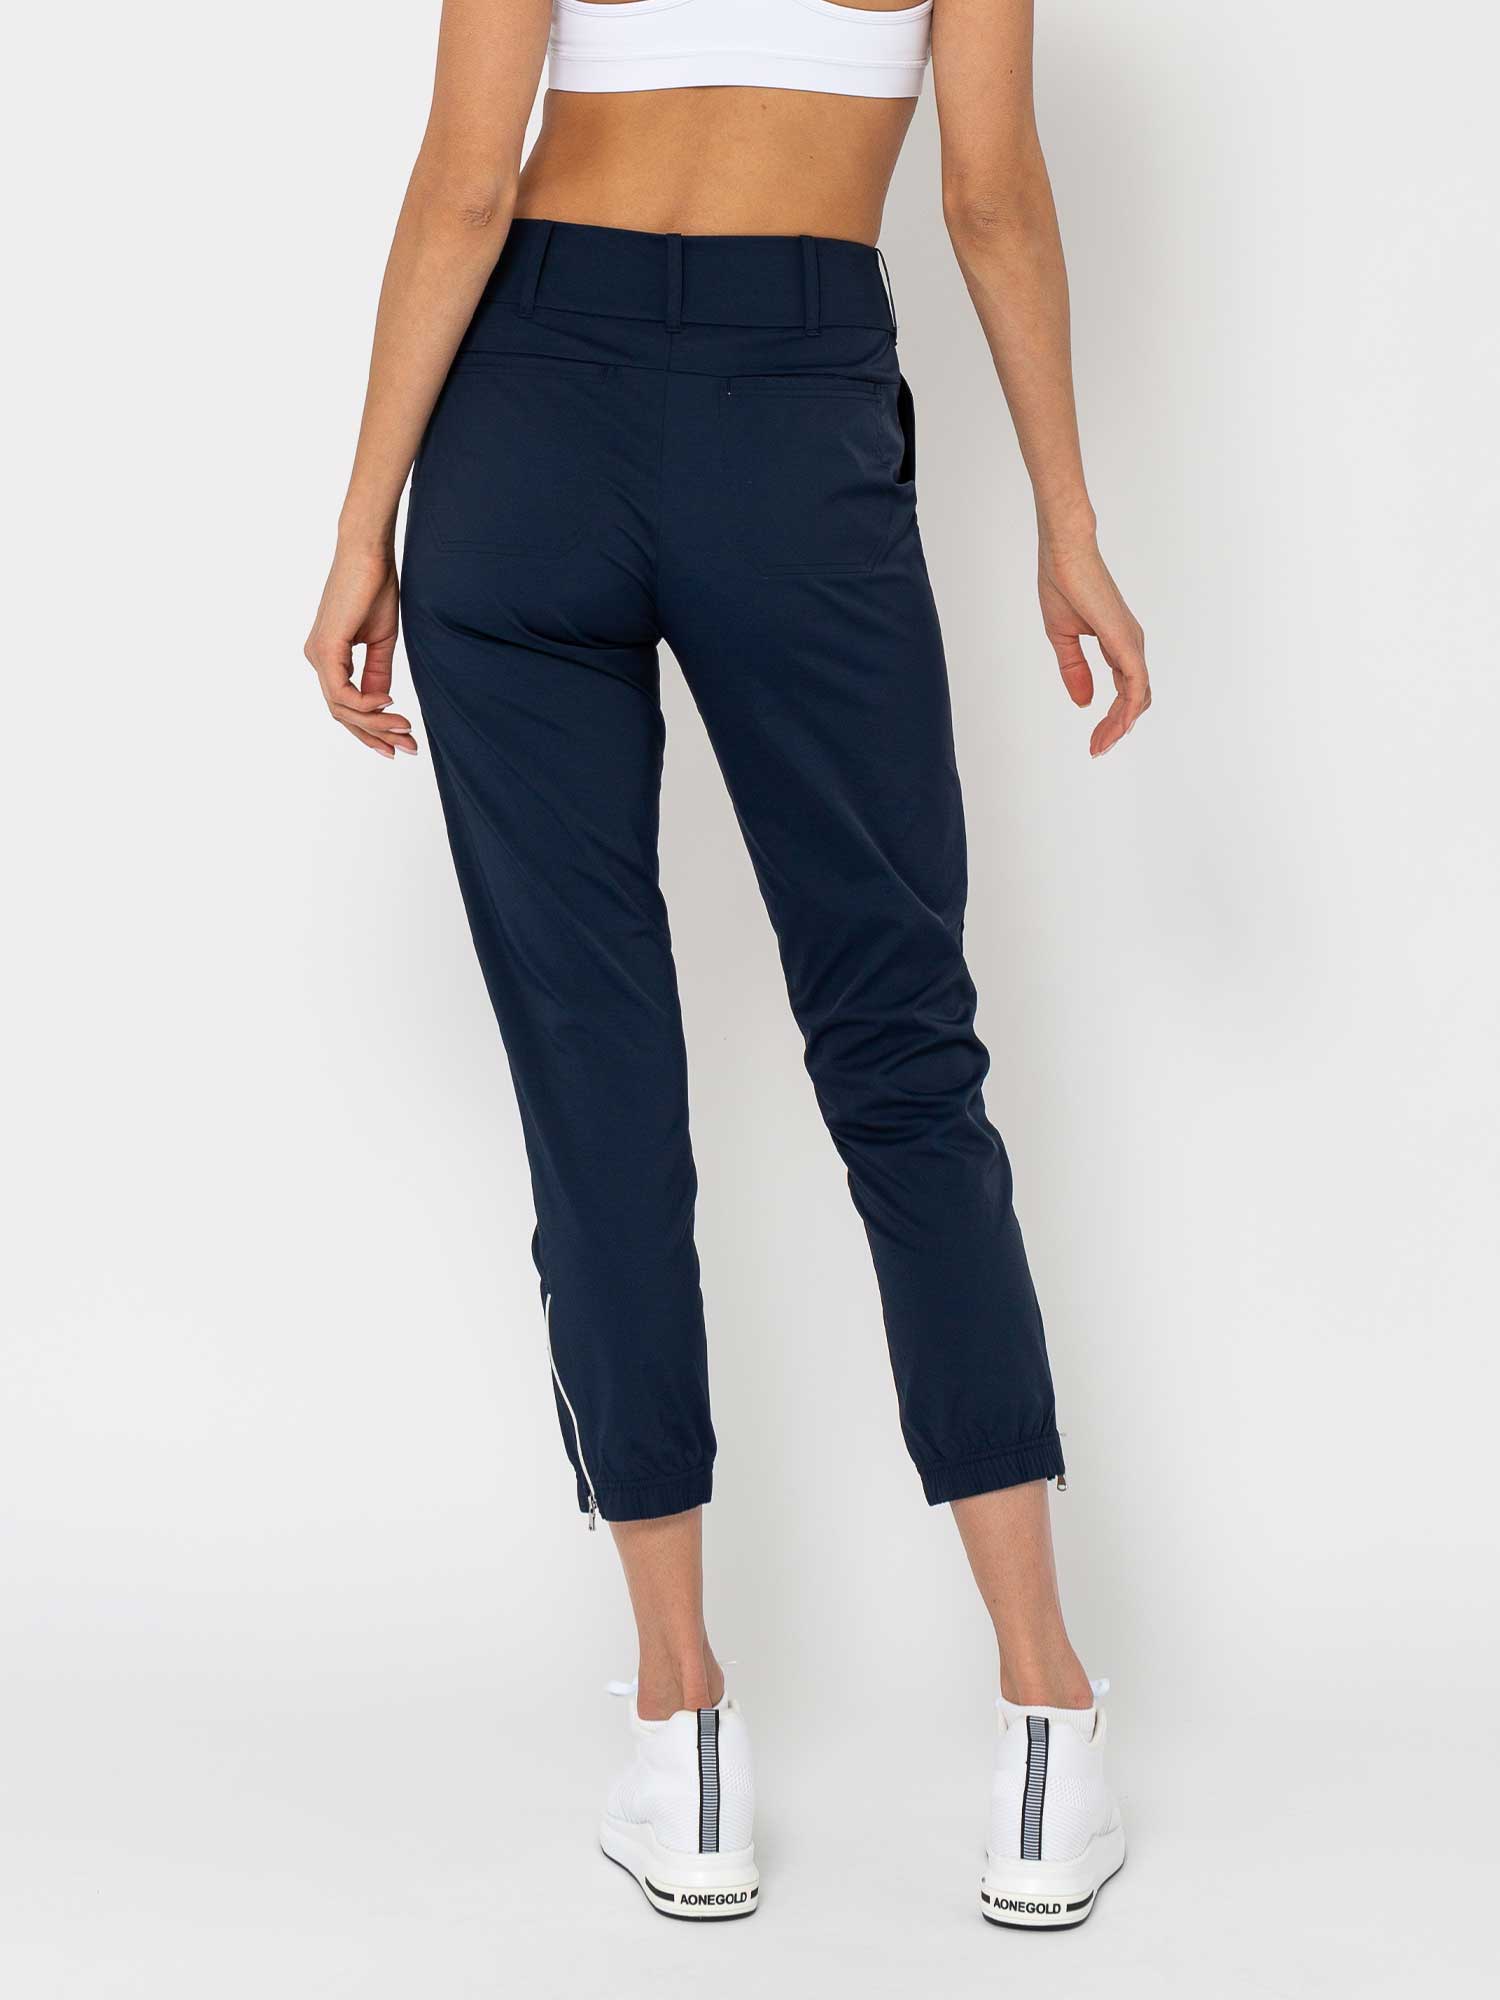 Easy Fit Active Pants - Midnight